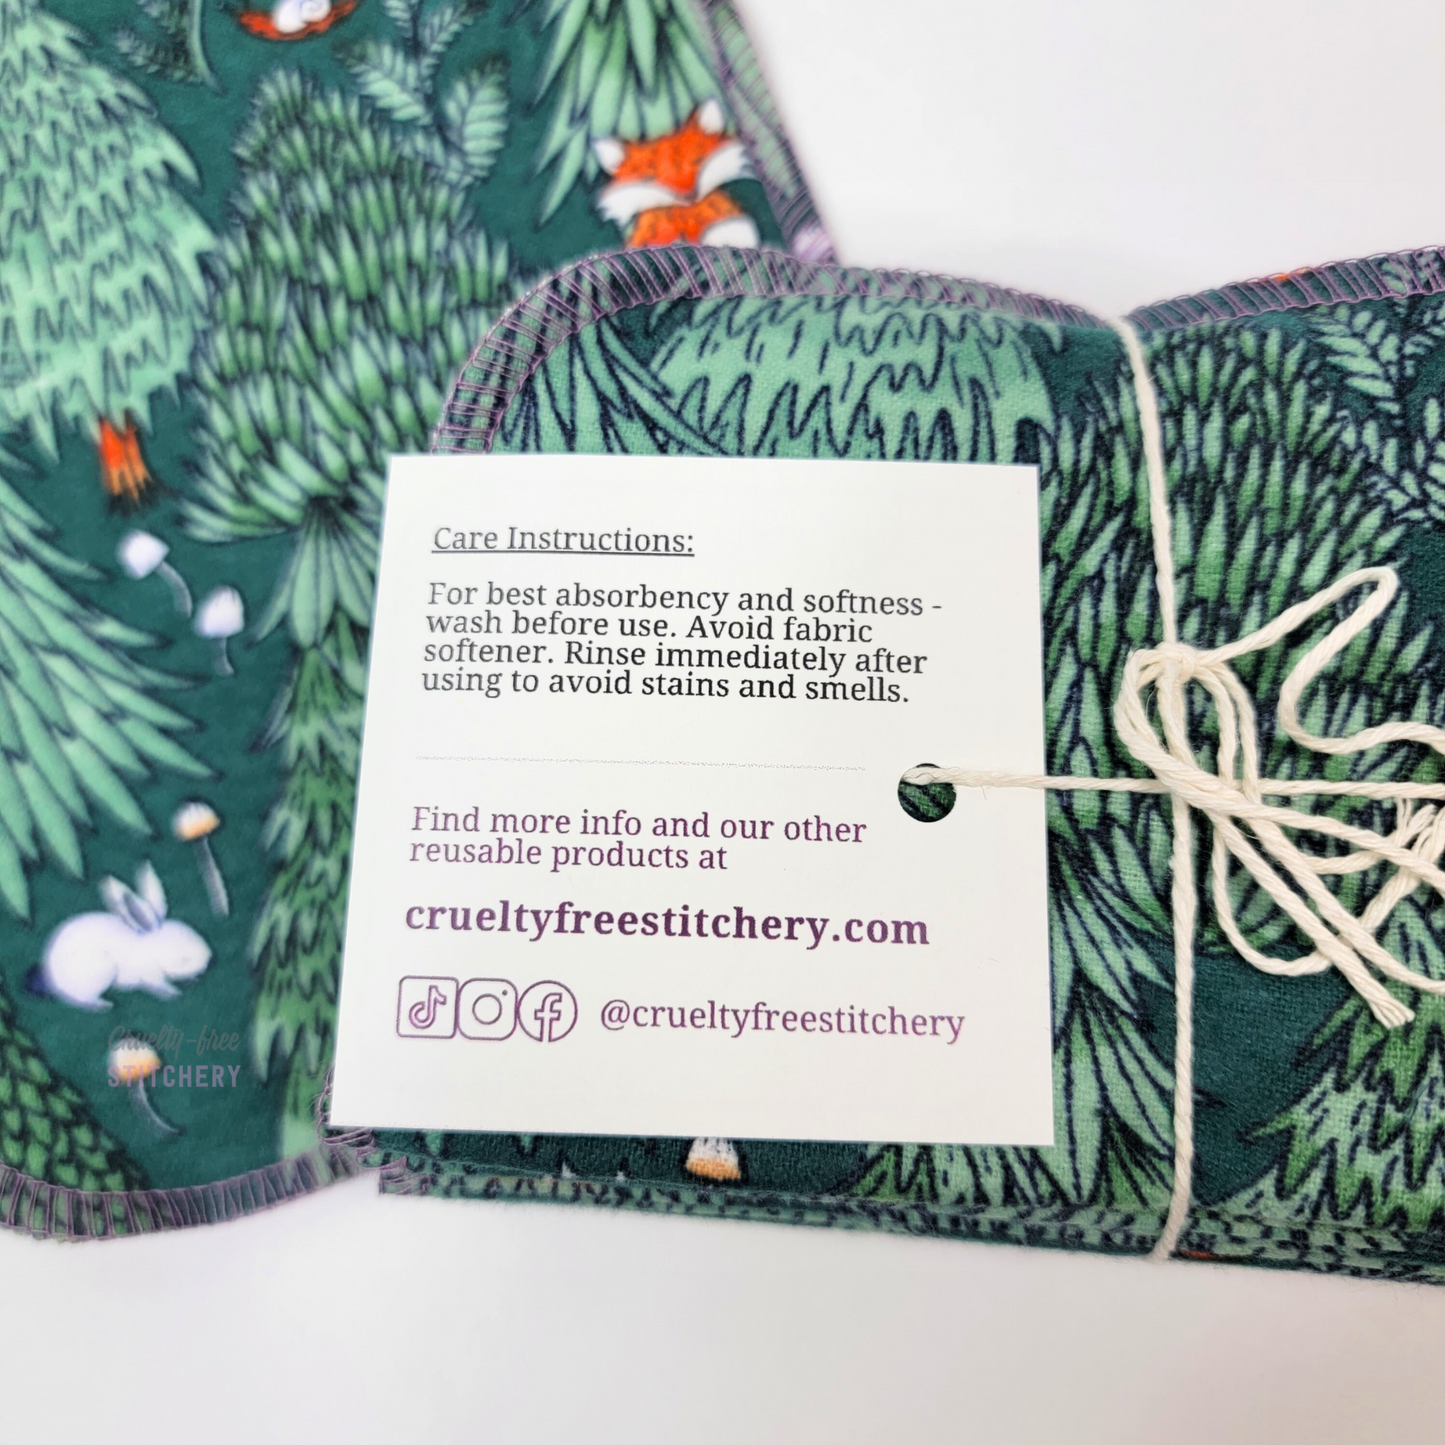 The back of the tag on the bundled pack of cloth wipes. Contains care instructions and info about our shop, which can be found in the item description.